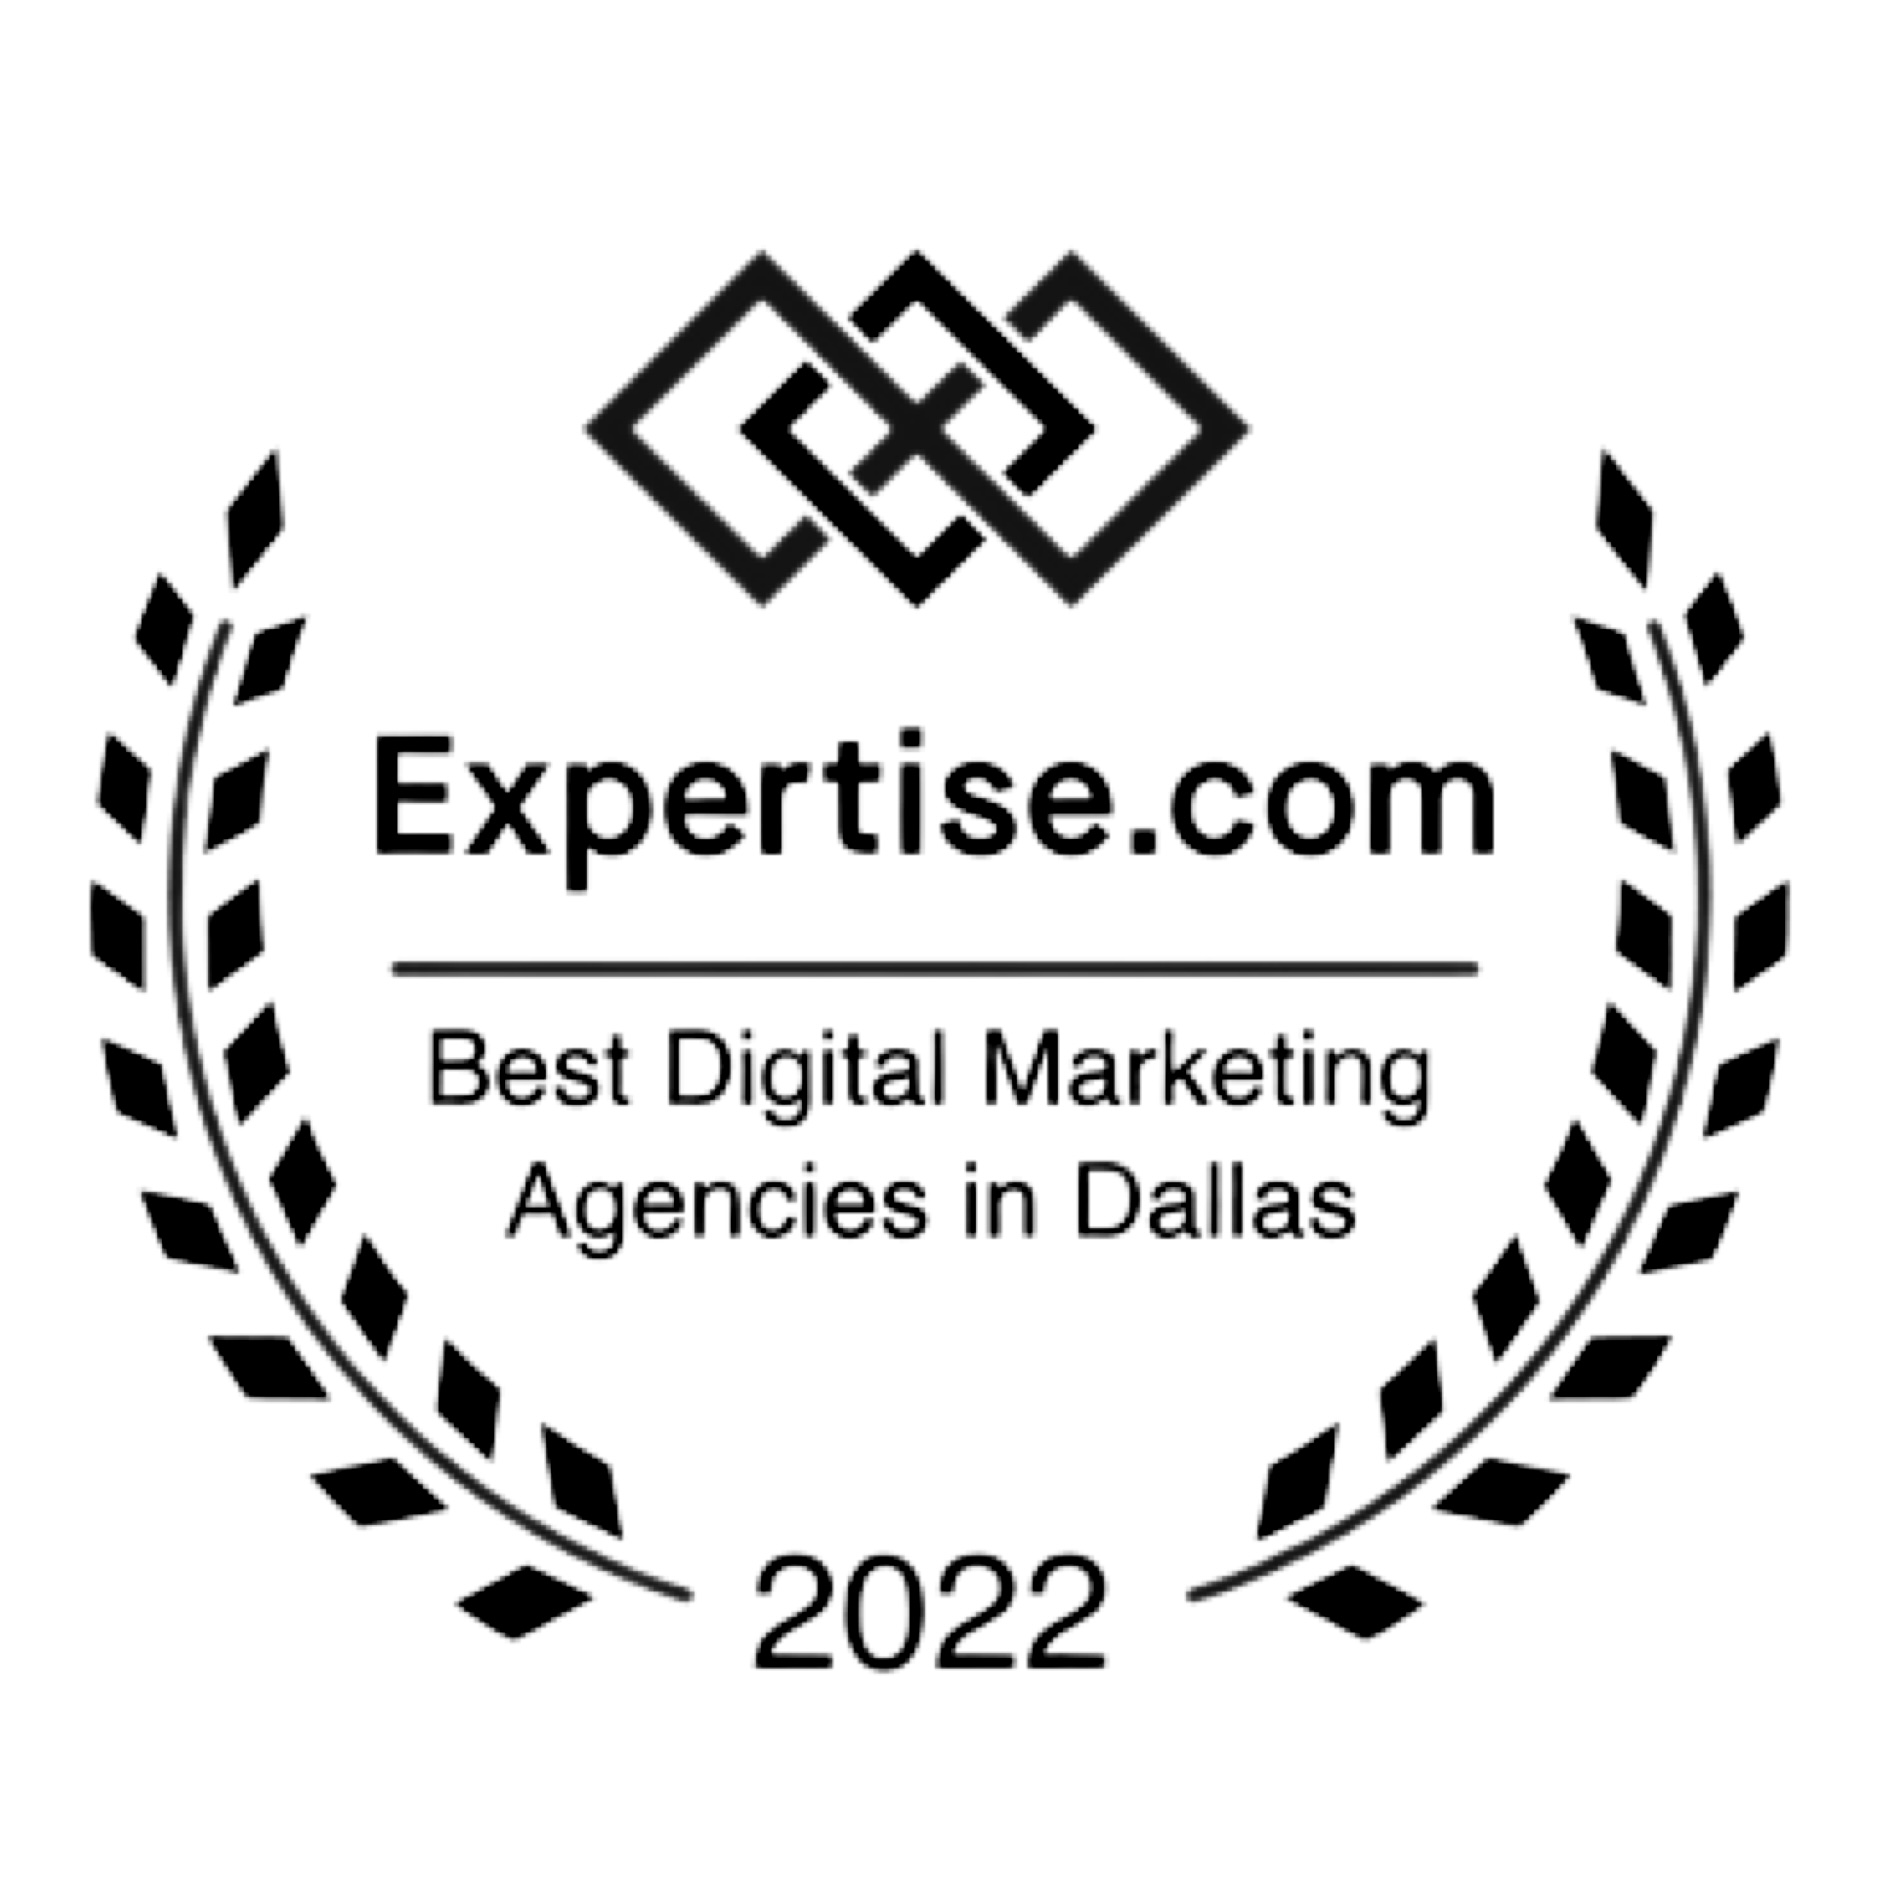 United States agency Altered State Productions wins Best Digital Marketing Agencies in Dallas - Expertise.,9’ award